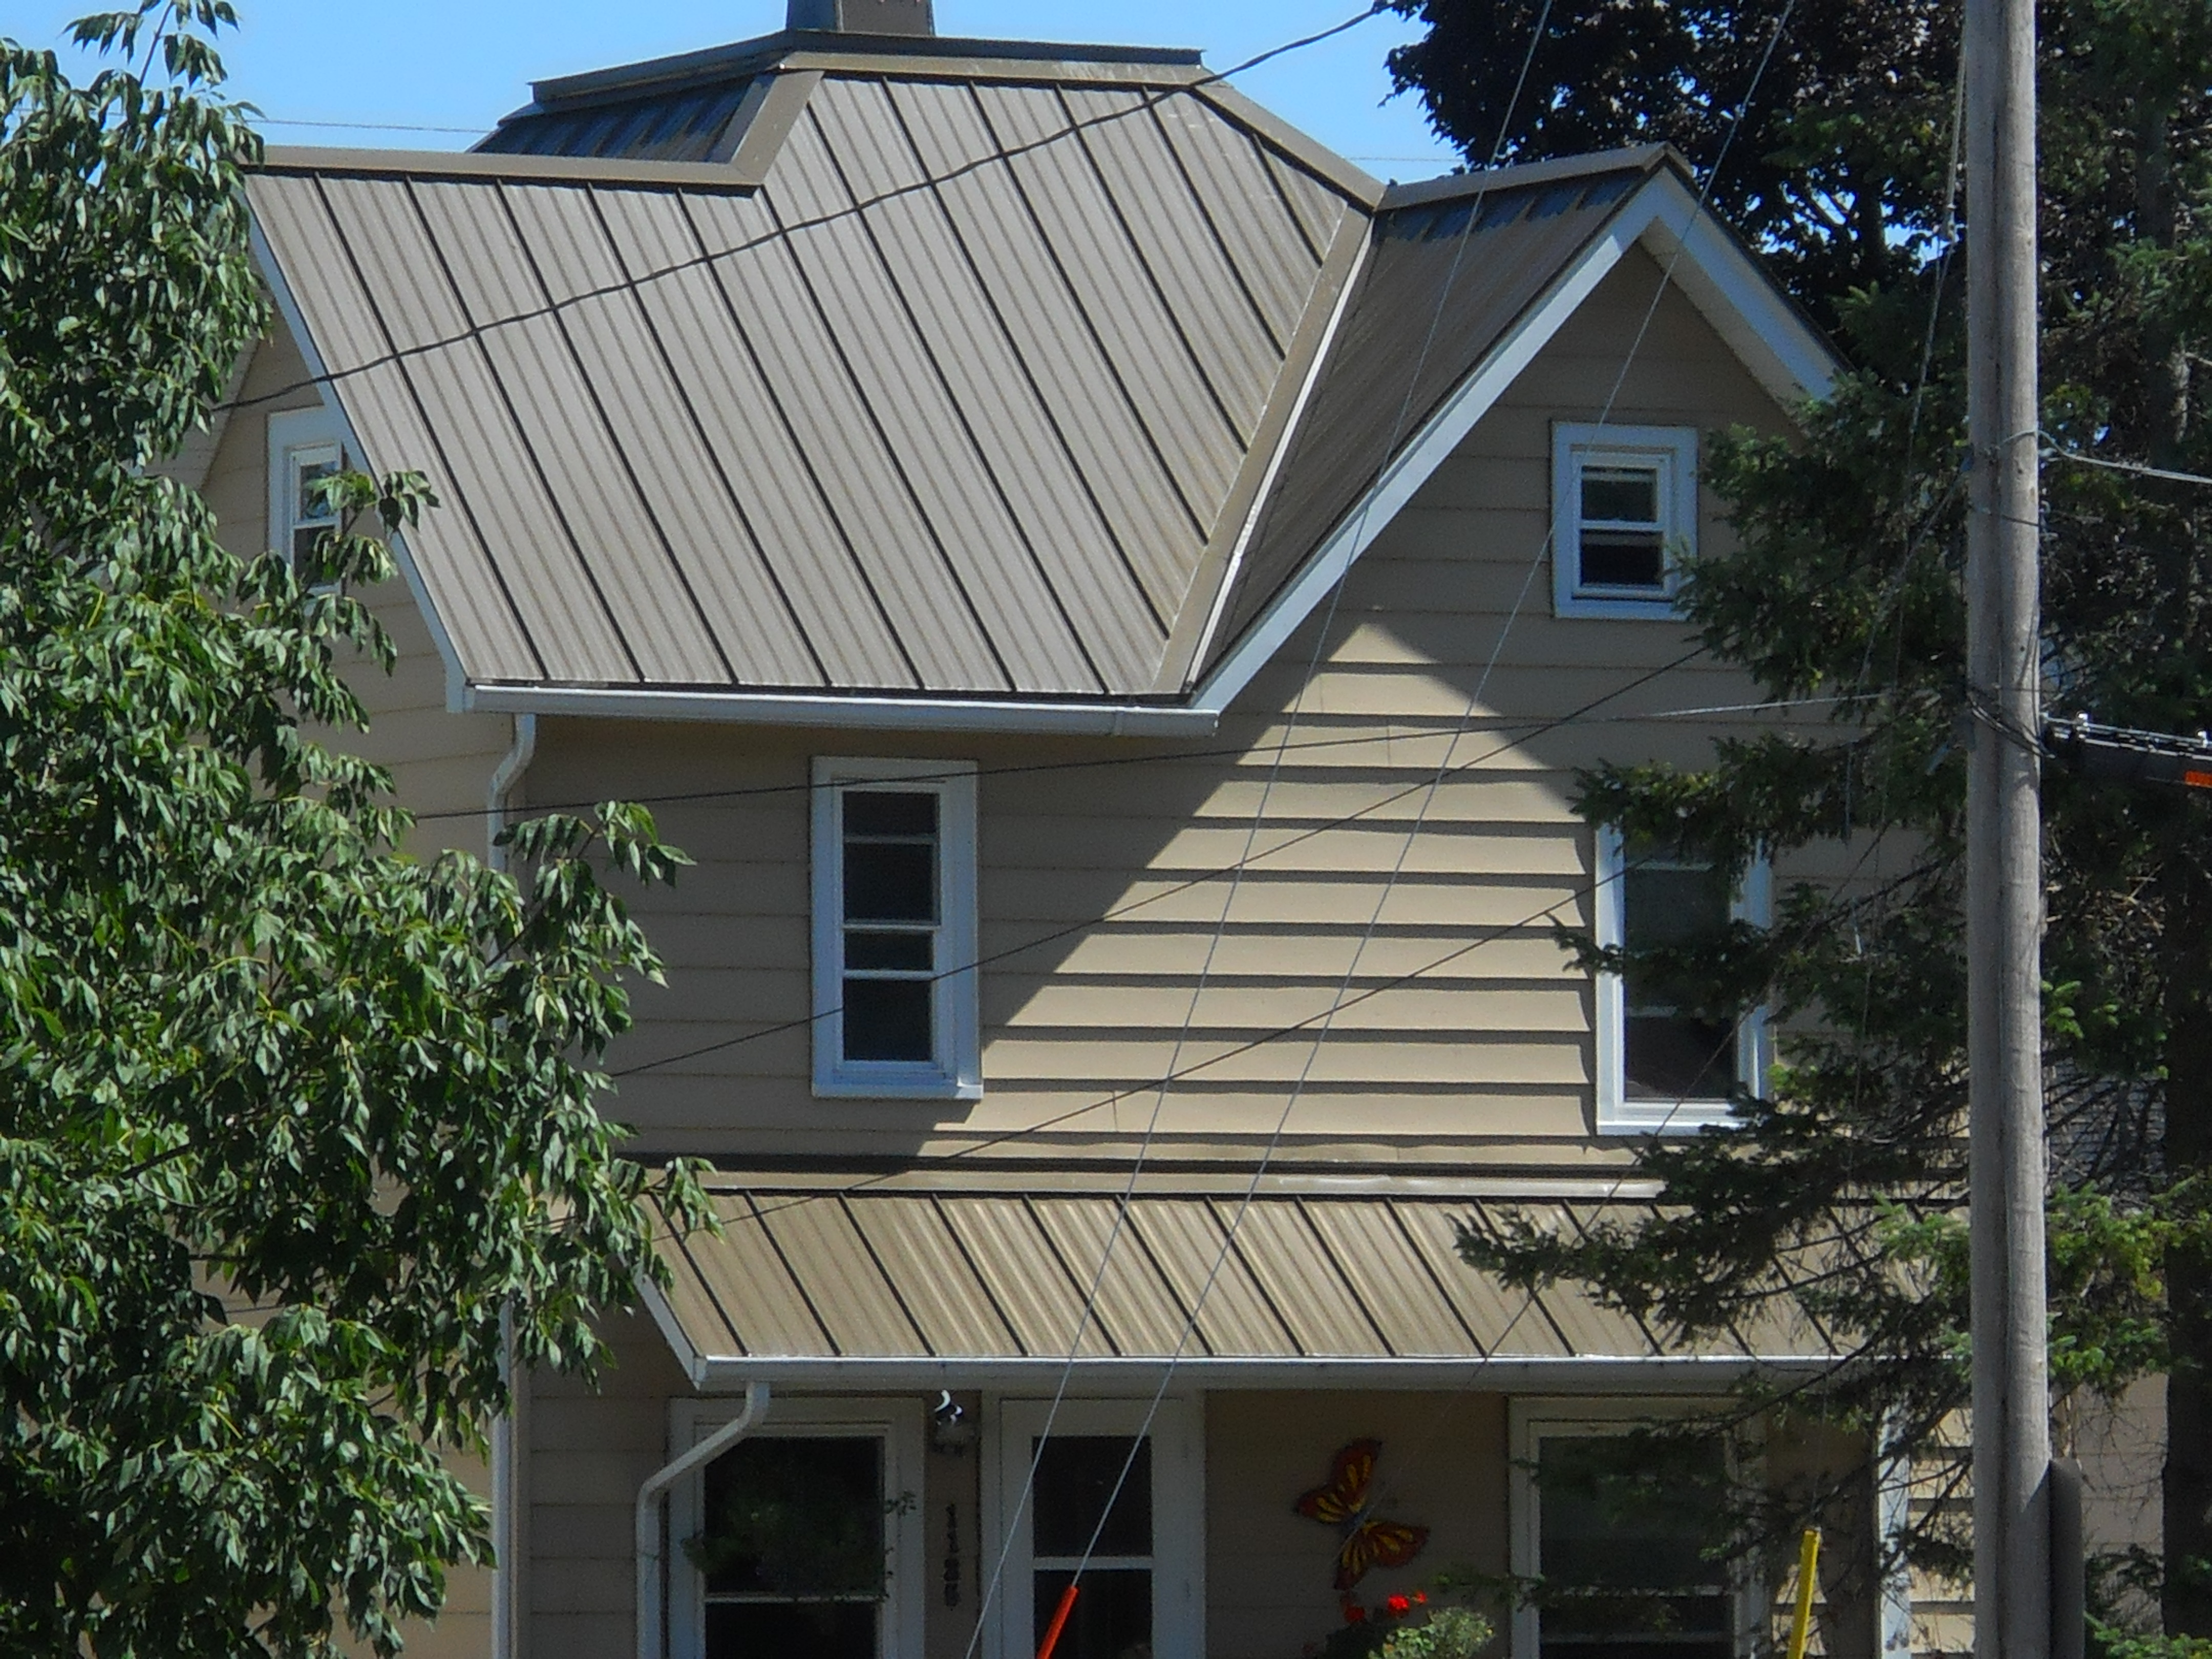 Paramount Roofing & Siding LLC Video & Image Gallery ProView